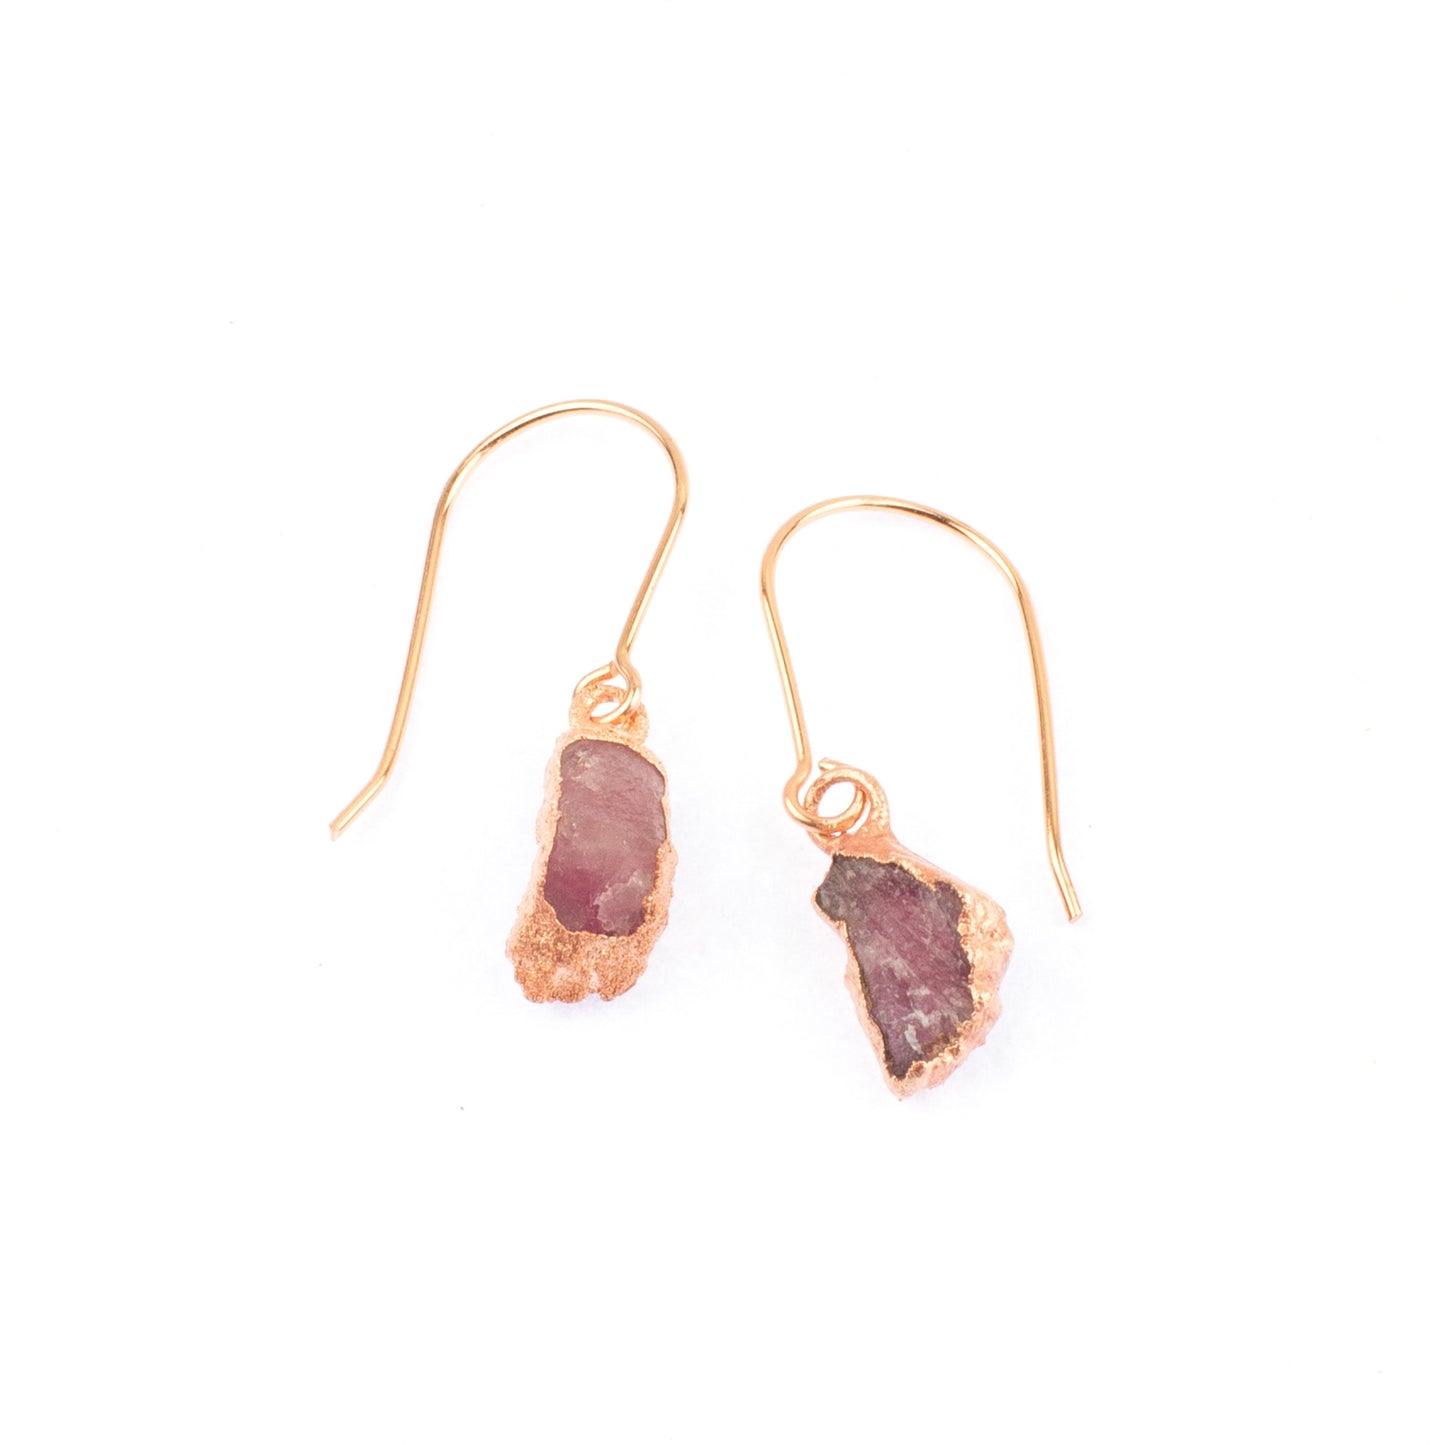 Large Pink Tourmaline Short Dangly Earrings (October birthstone)